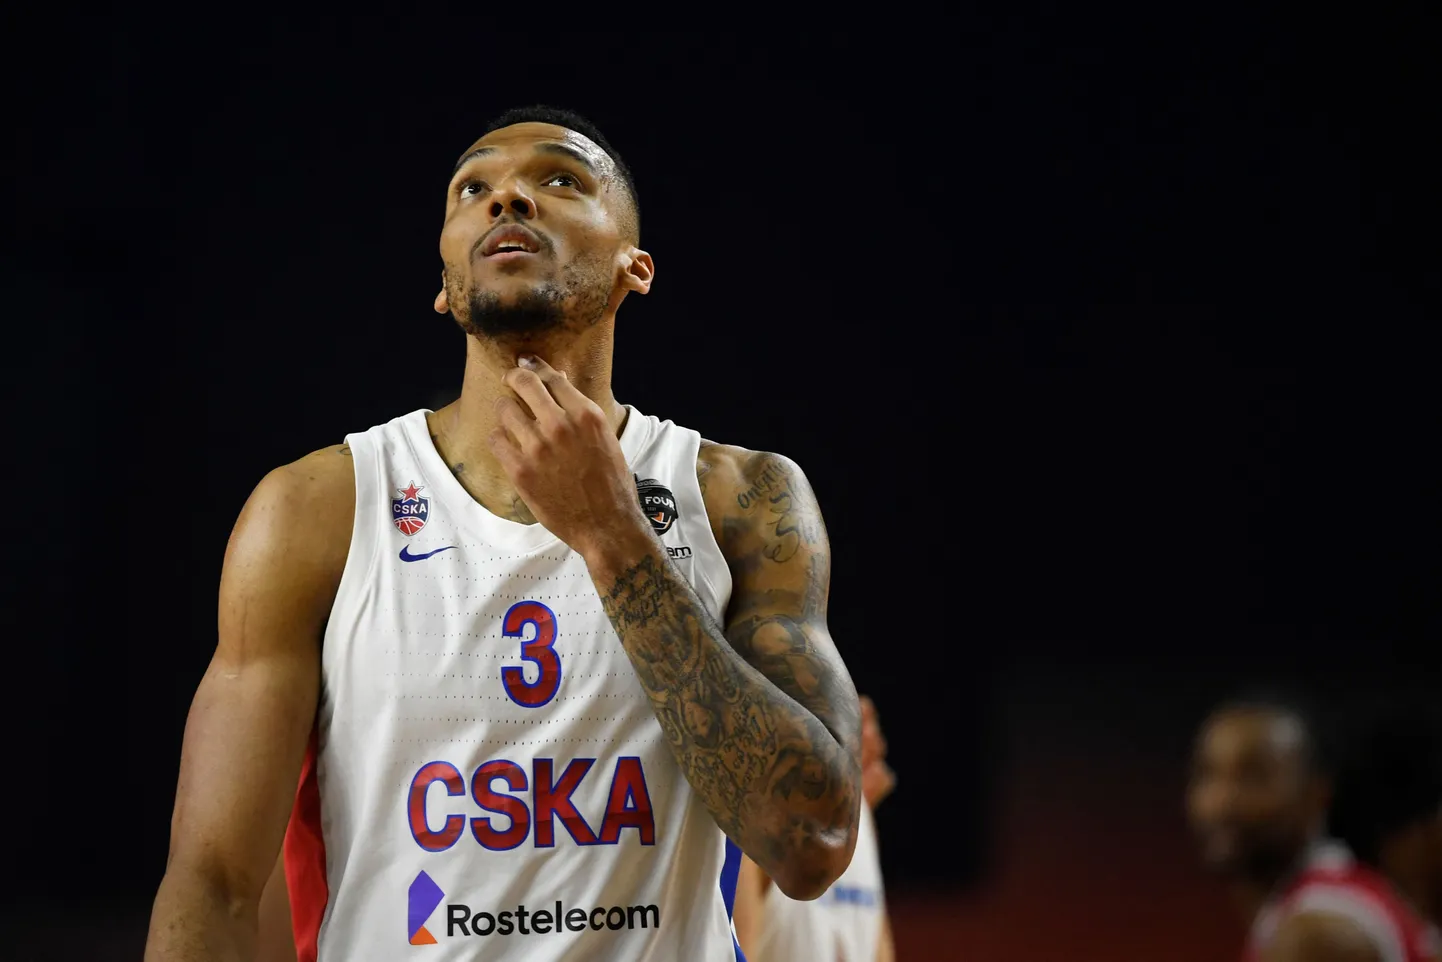 CSKA Moscow's Joel Bolomboy looks on after the Basketball Euroleague Final Four championship third place match between Pallacanestro Olimpia Milano and CSKA Moscow in Cologne, western Germany, on May 30, 2021. (Photo by Ina Fassbender / AFP)